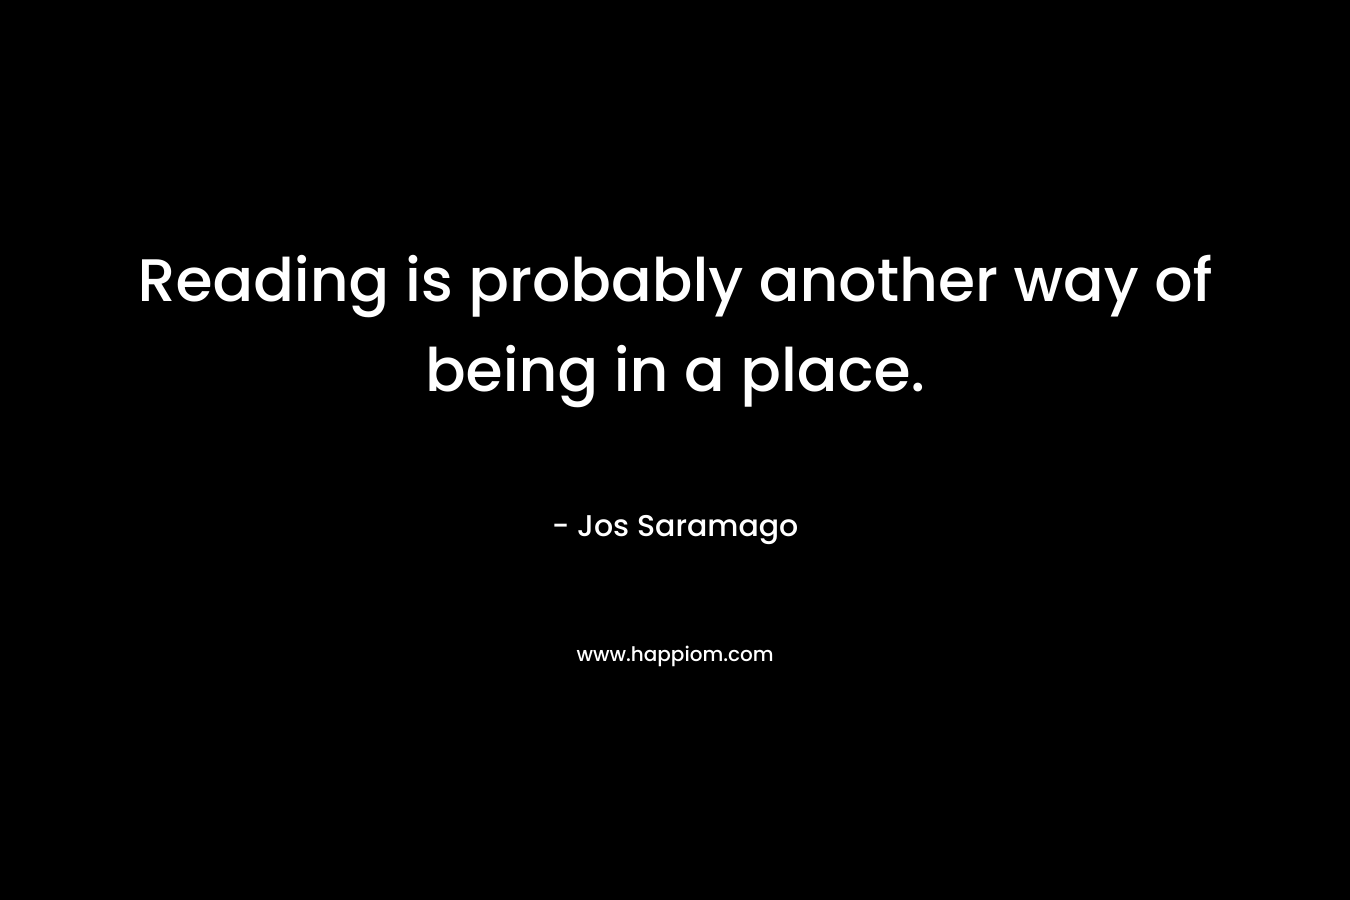 Reading is probably another way of being in a place.